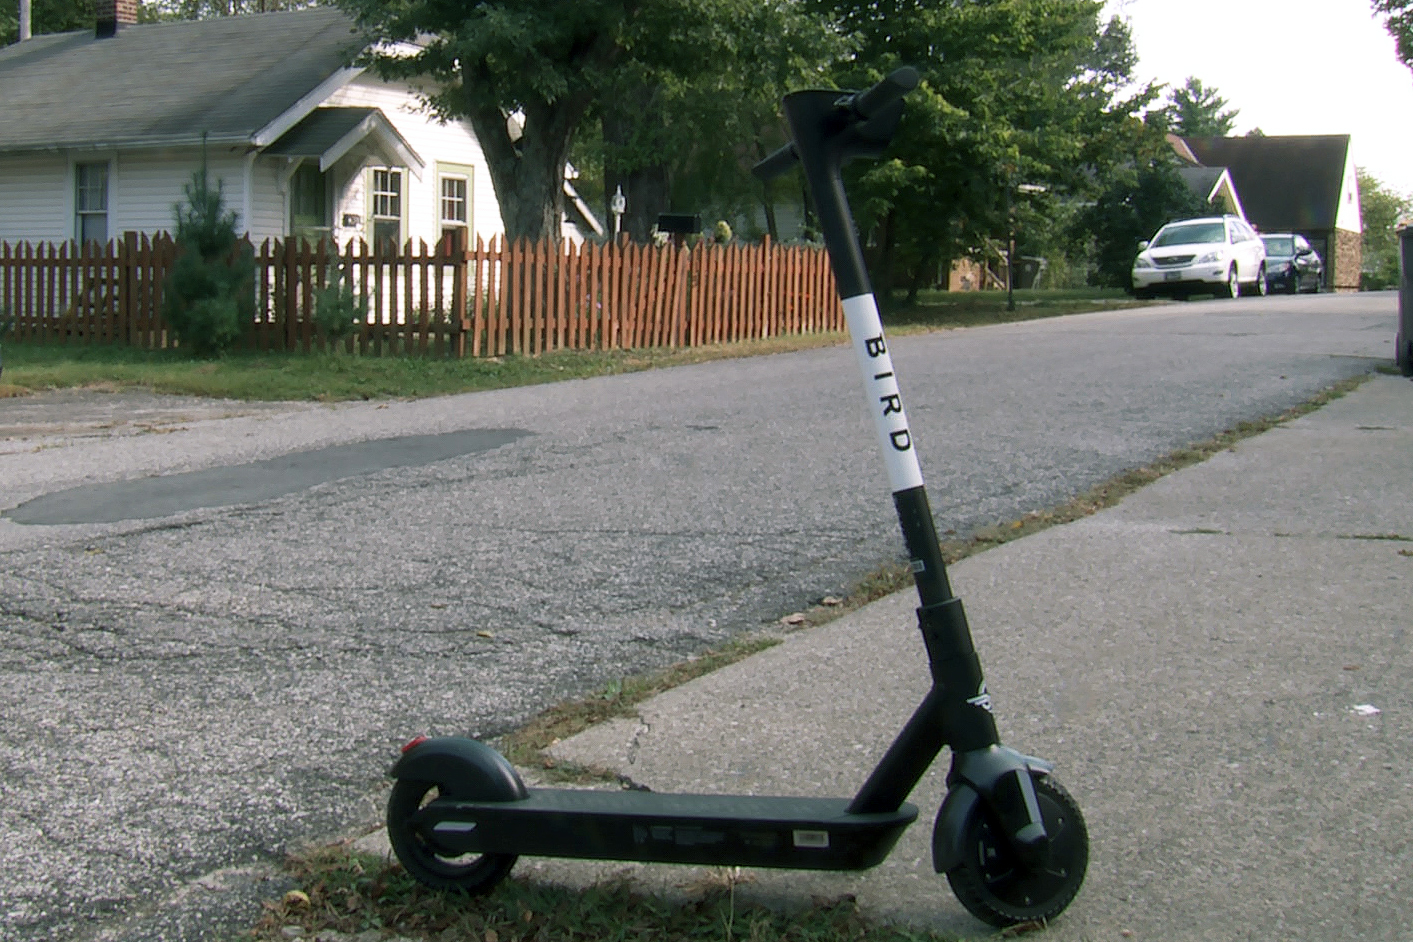 A Bird electric scooter sits in front of a house in a residential neighborhood.